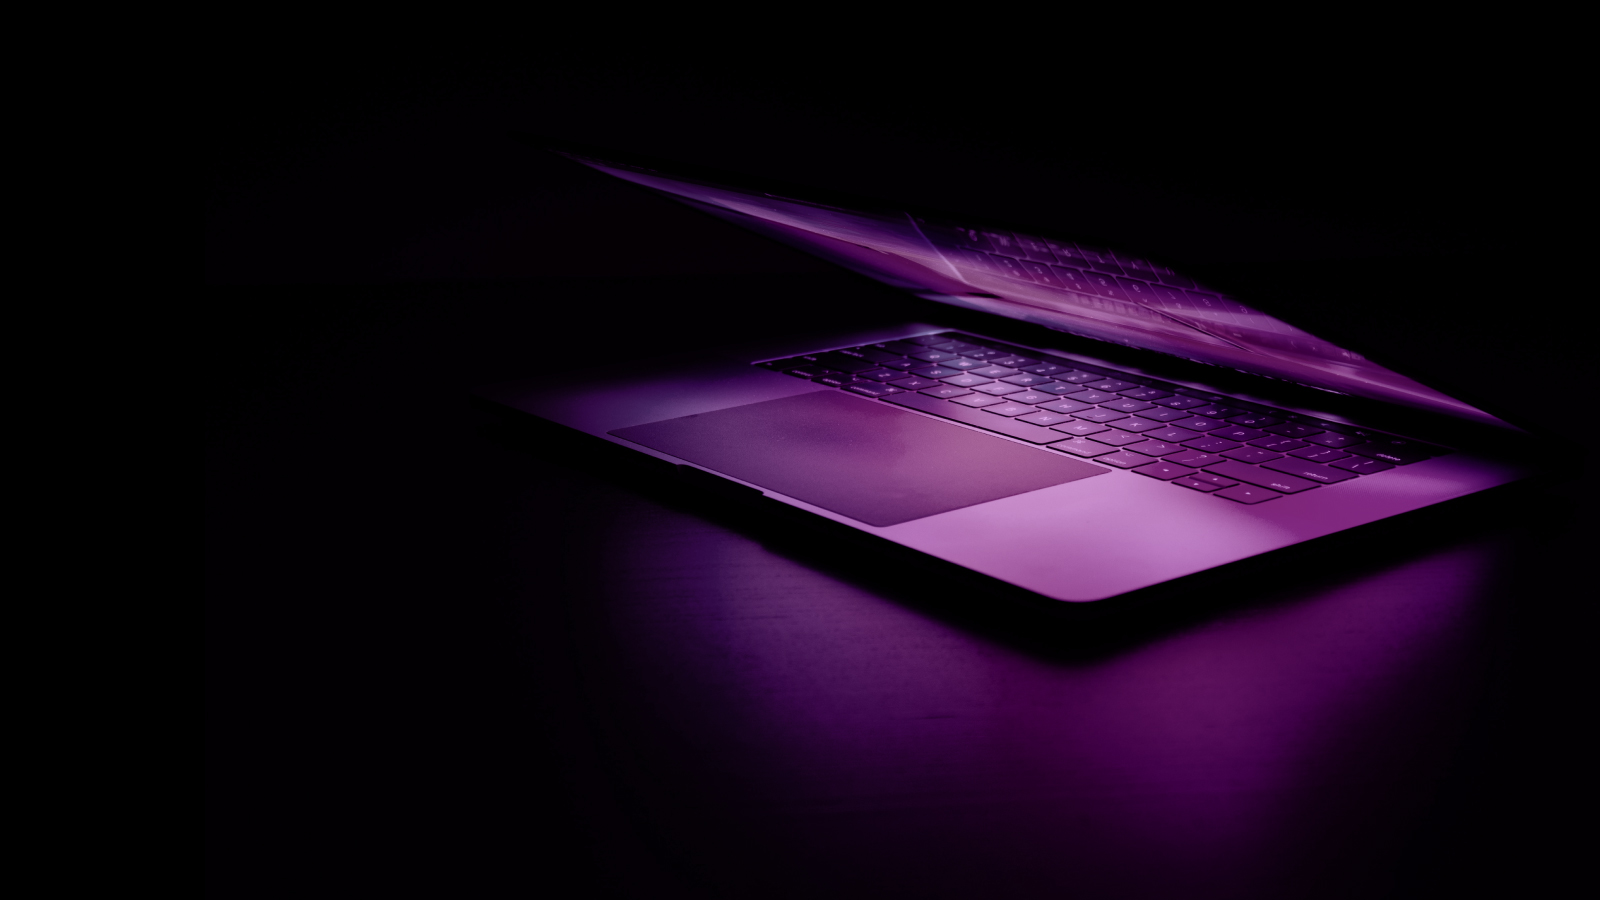 A brightly illuminated purple laptop shines in the darkness, showcasing its vibrant hue and sleek design.